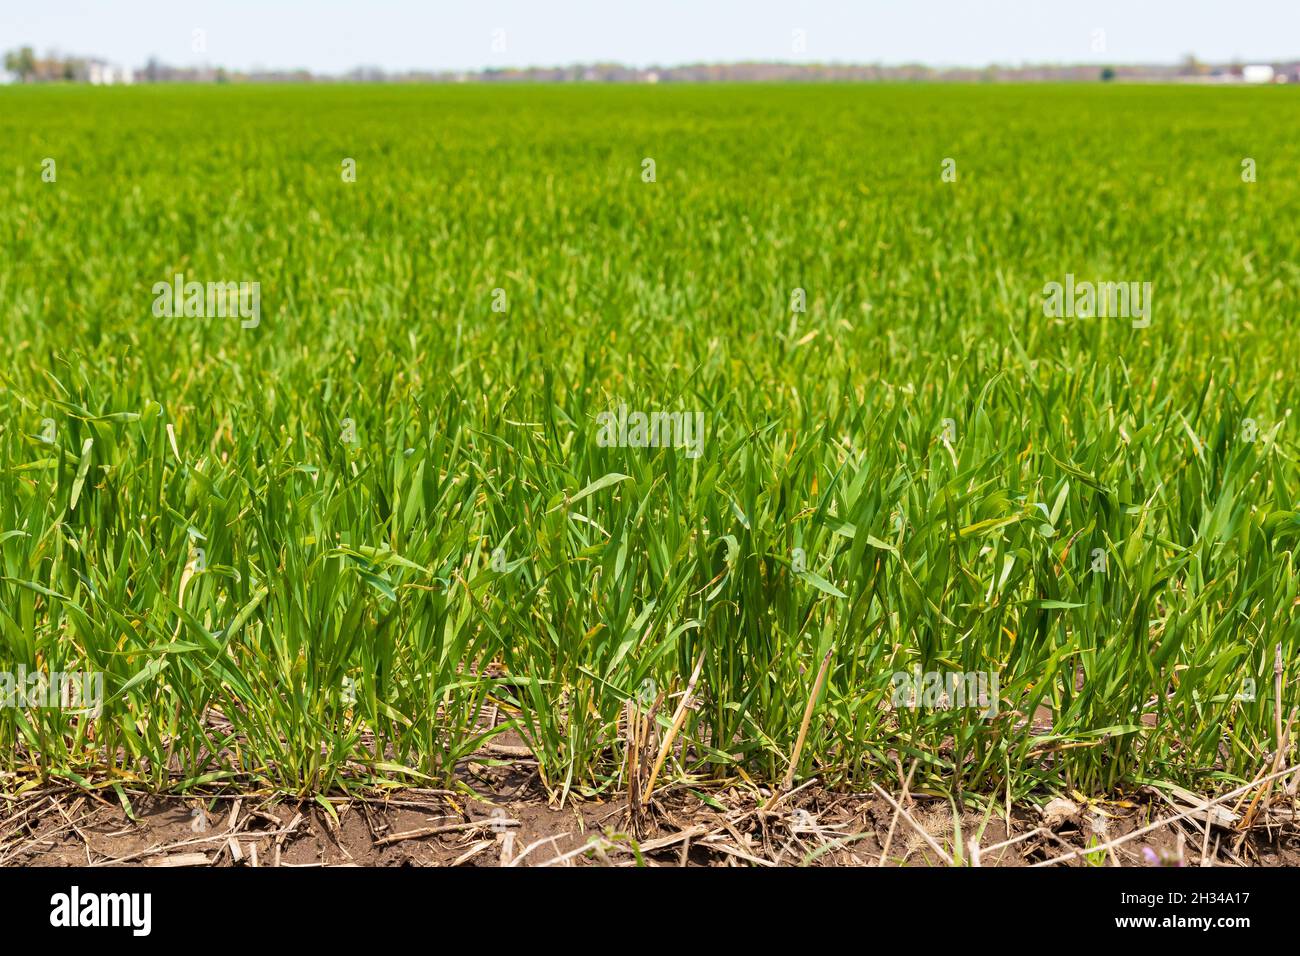 winter wheat field growing in spring. Concept of cereal grain farming, commodity market and trade Stock Photo